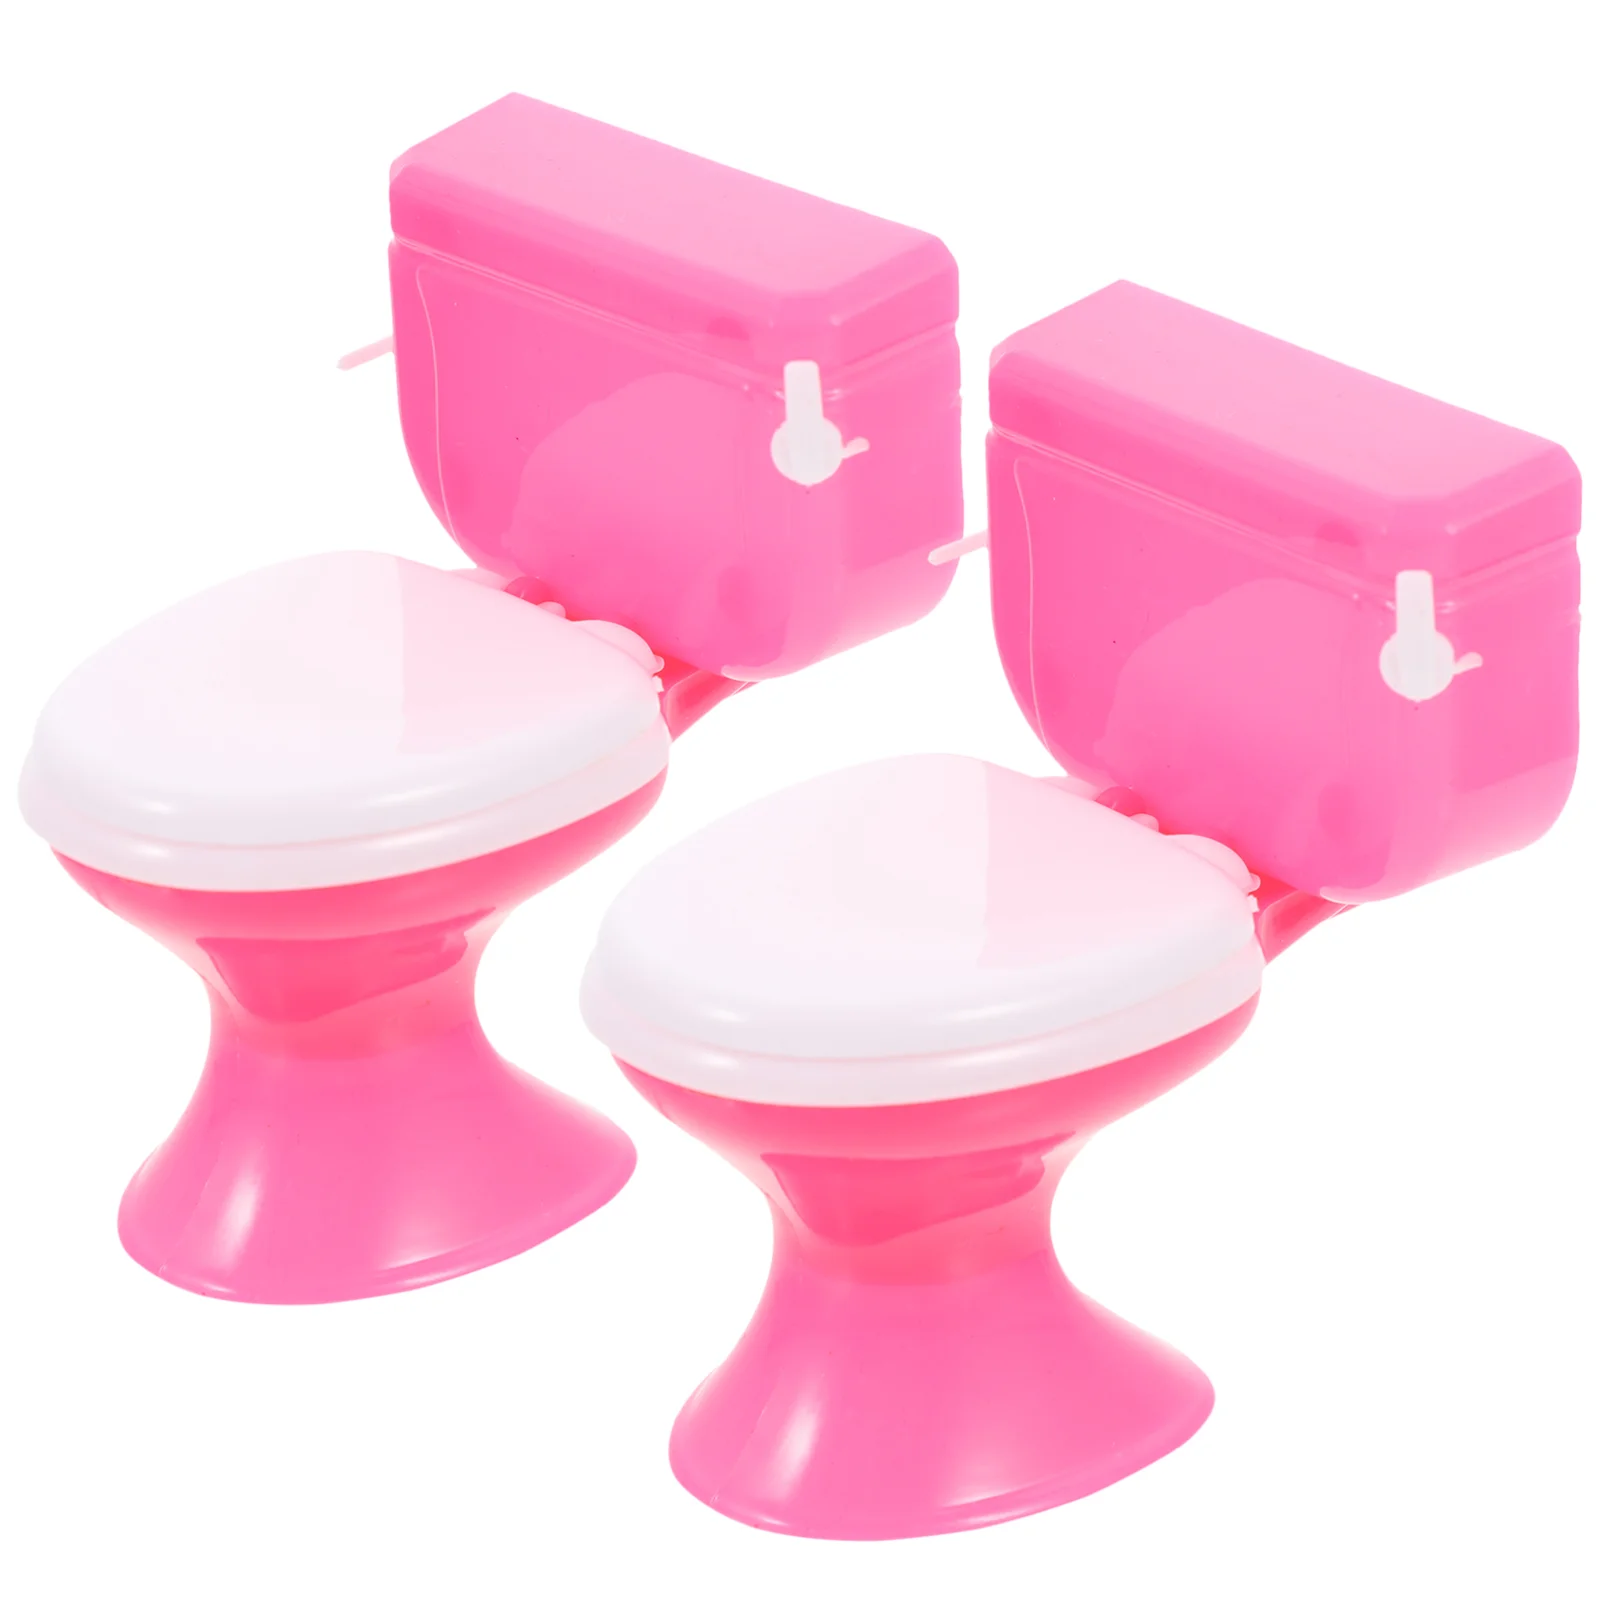 

2 Pcs Dollhouse Toilet Kids Educational Toys Simulated Interactive Plaything Miniature Seats Plastic Interesting Gifts Child